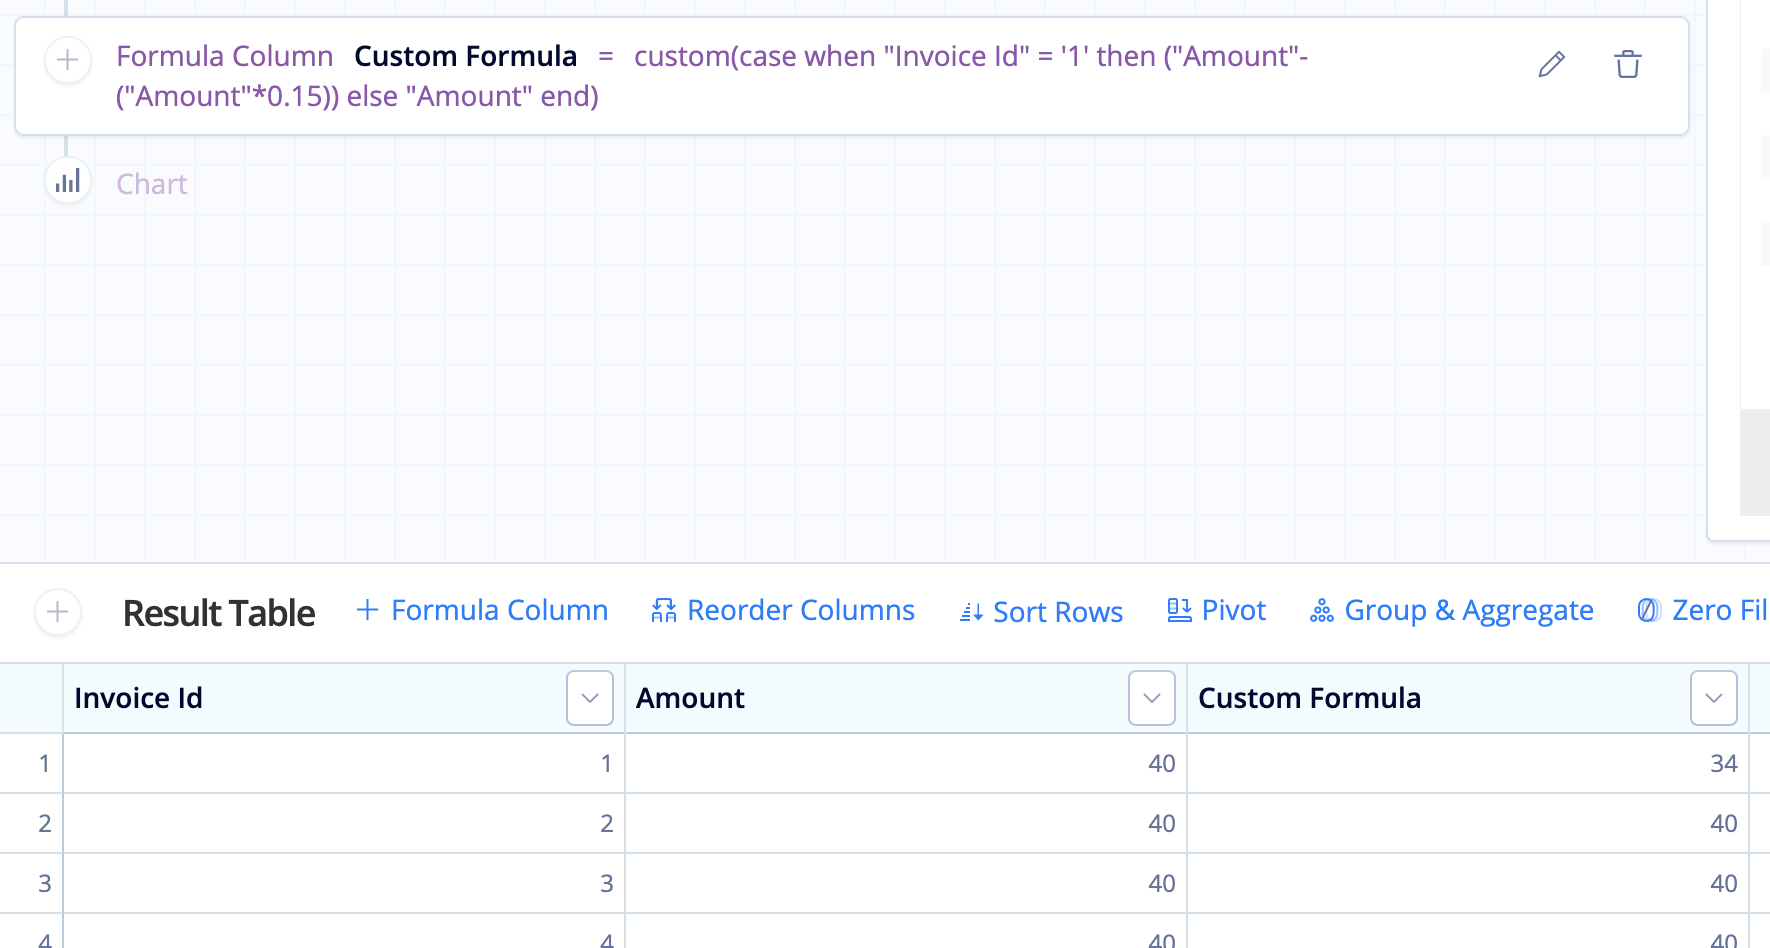 Add a column to calculate adjusted cost using a CASE statement